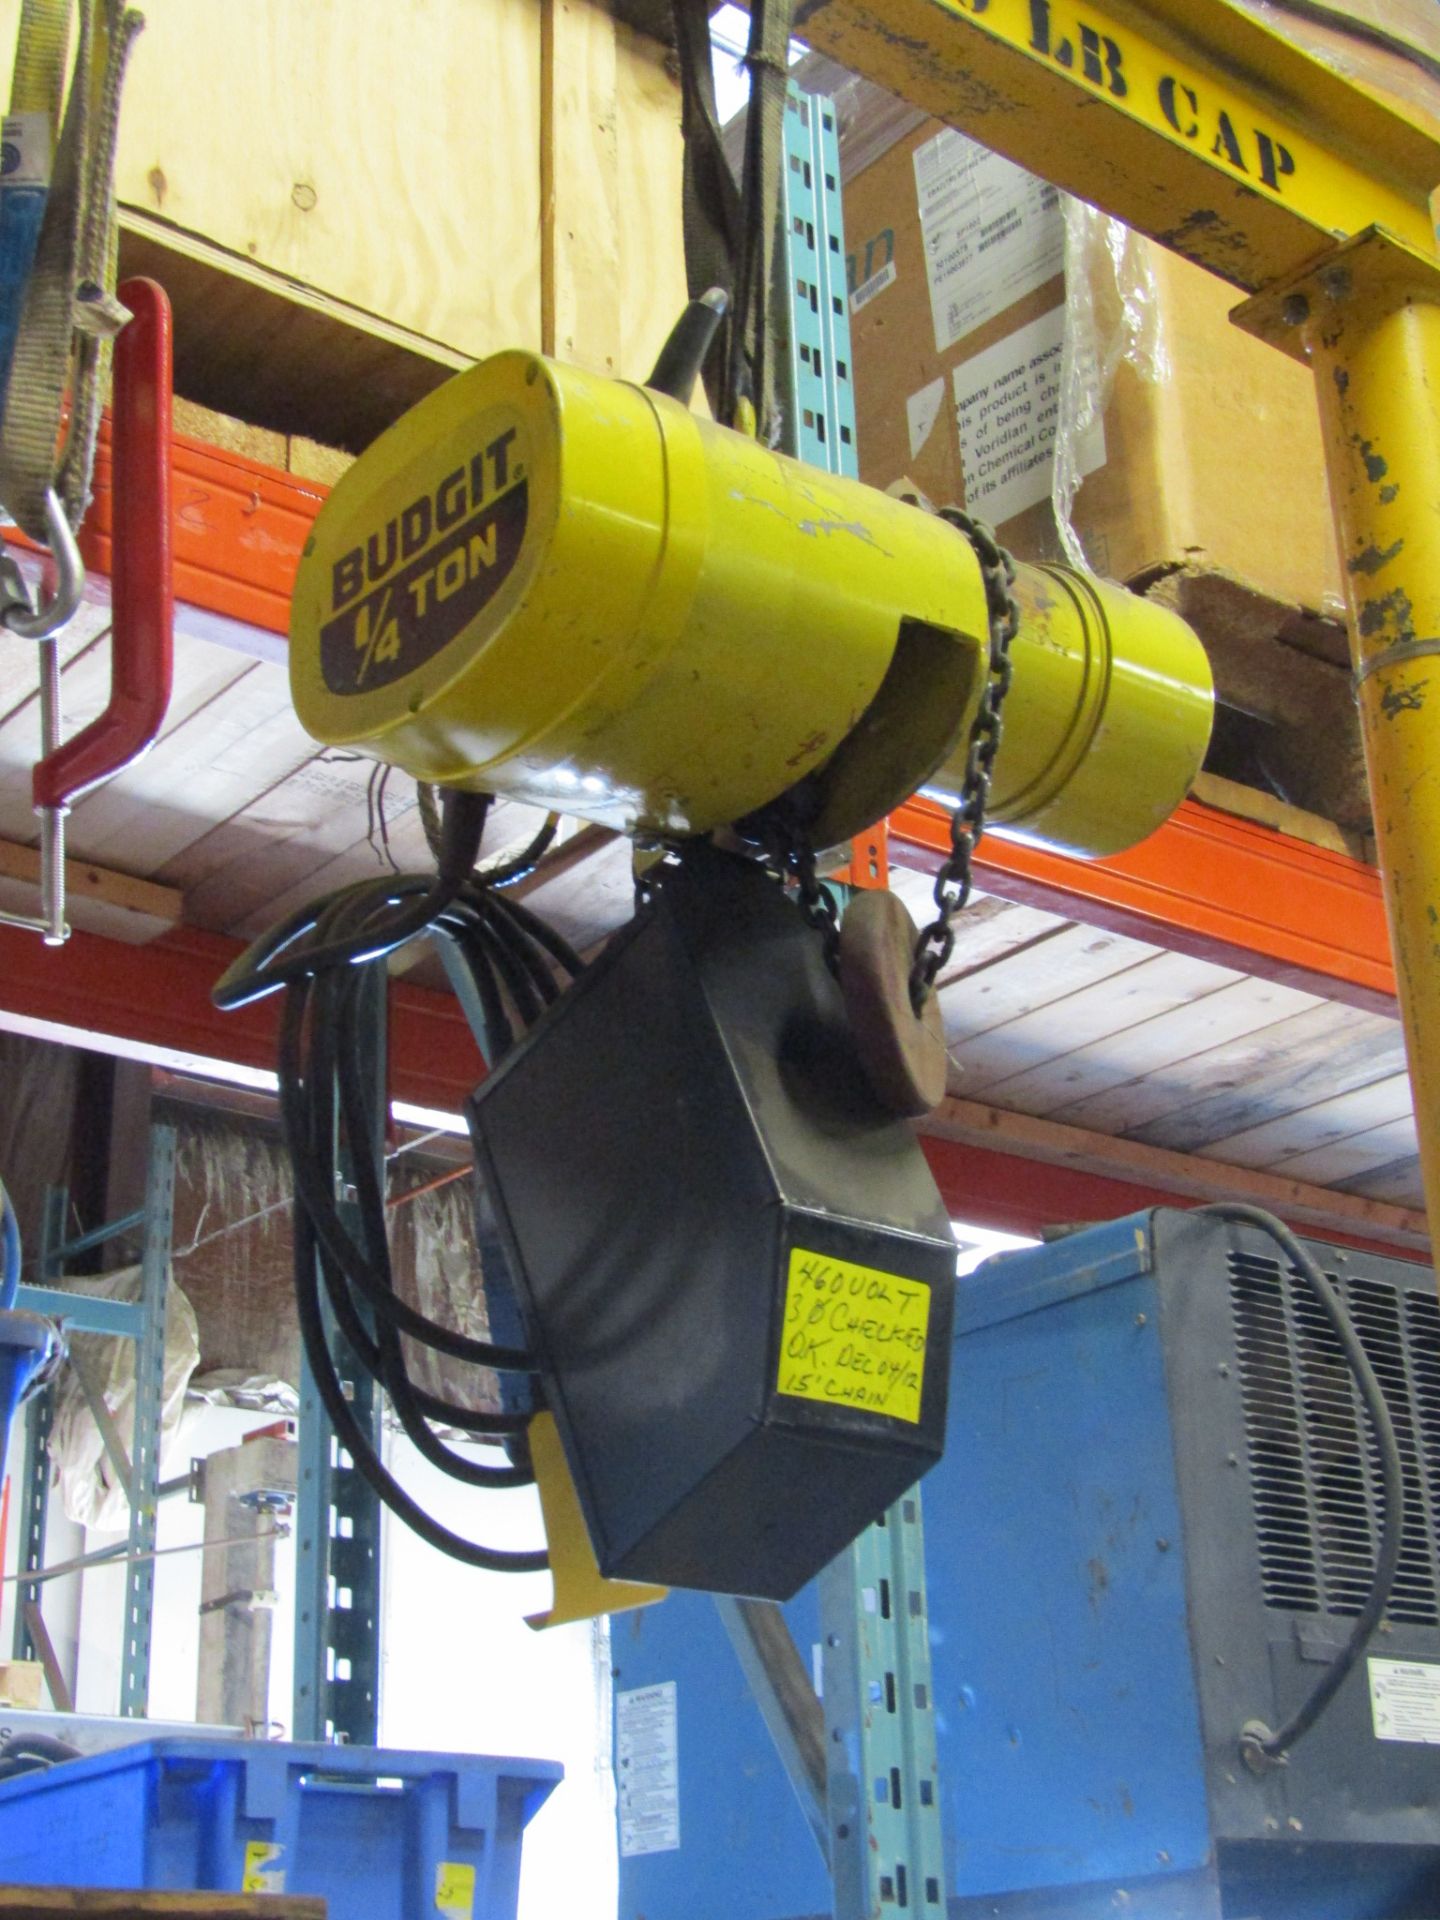 Budget 1/4 Ton 500lbs Electric Hoist with 15' chain with pendant control